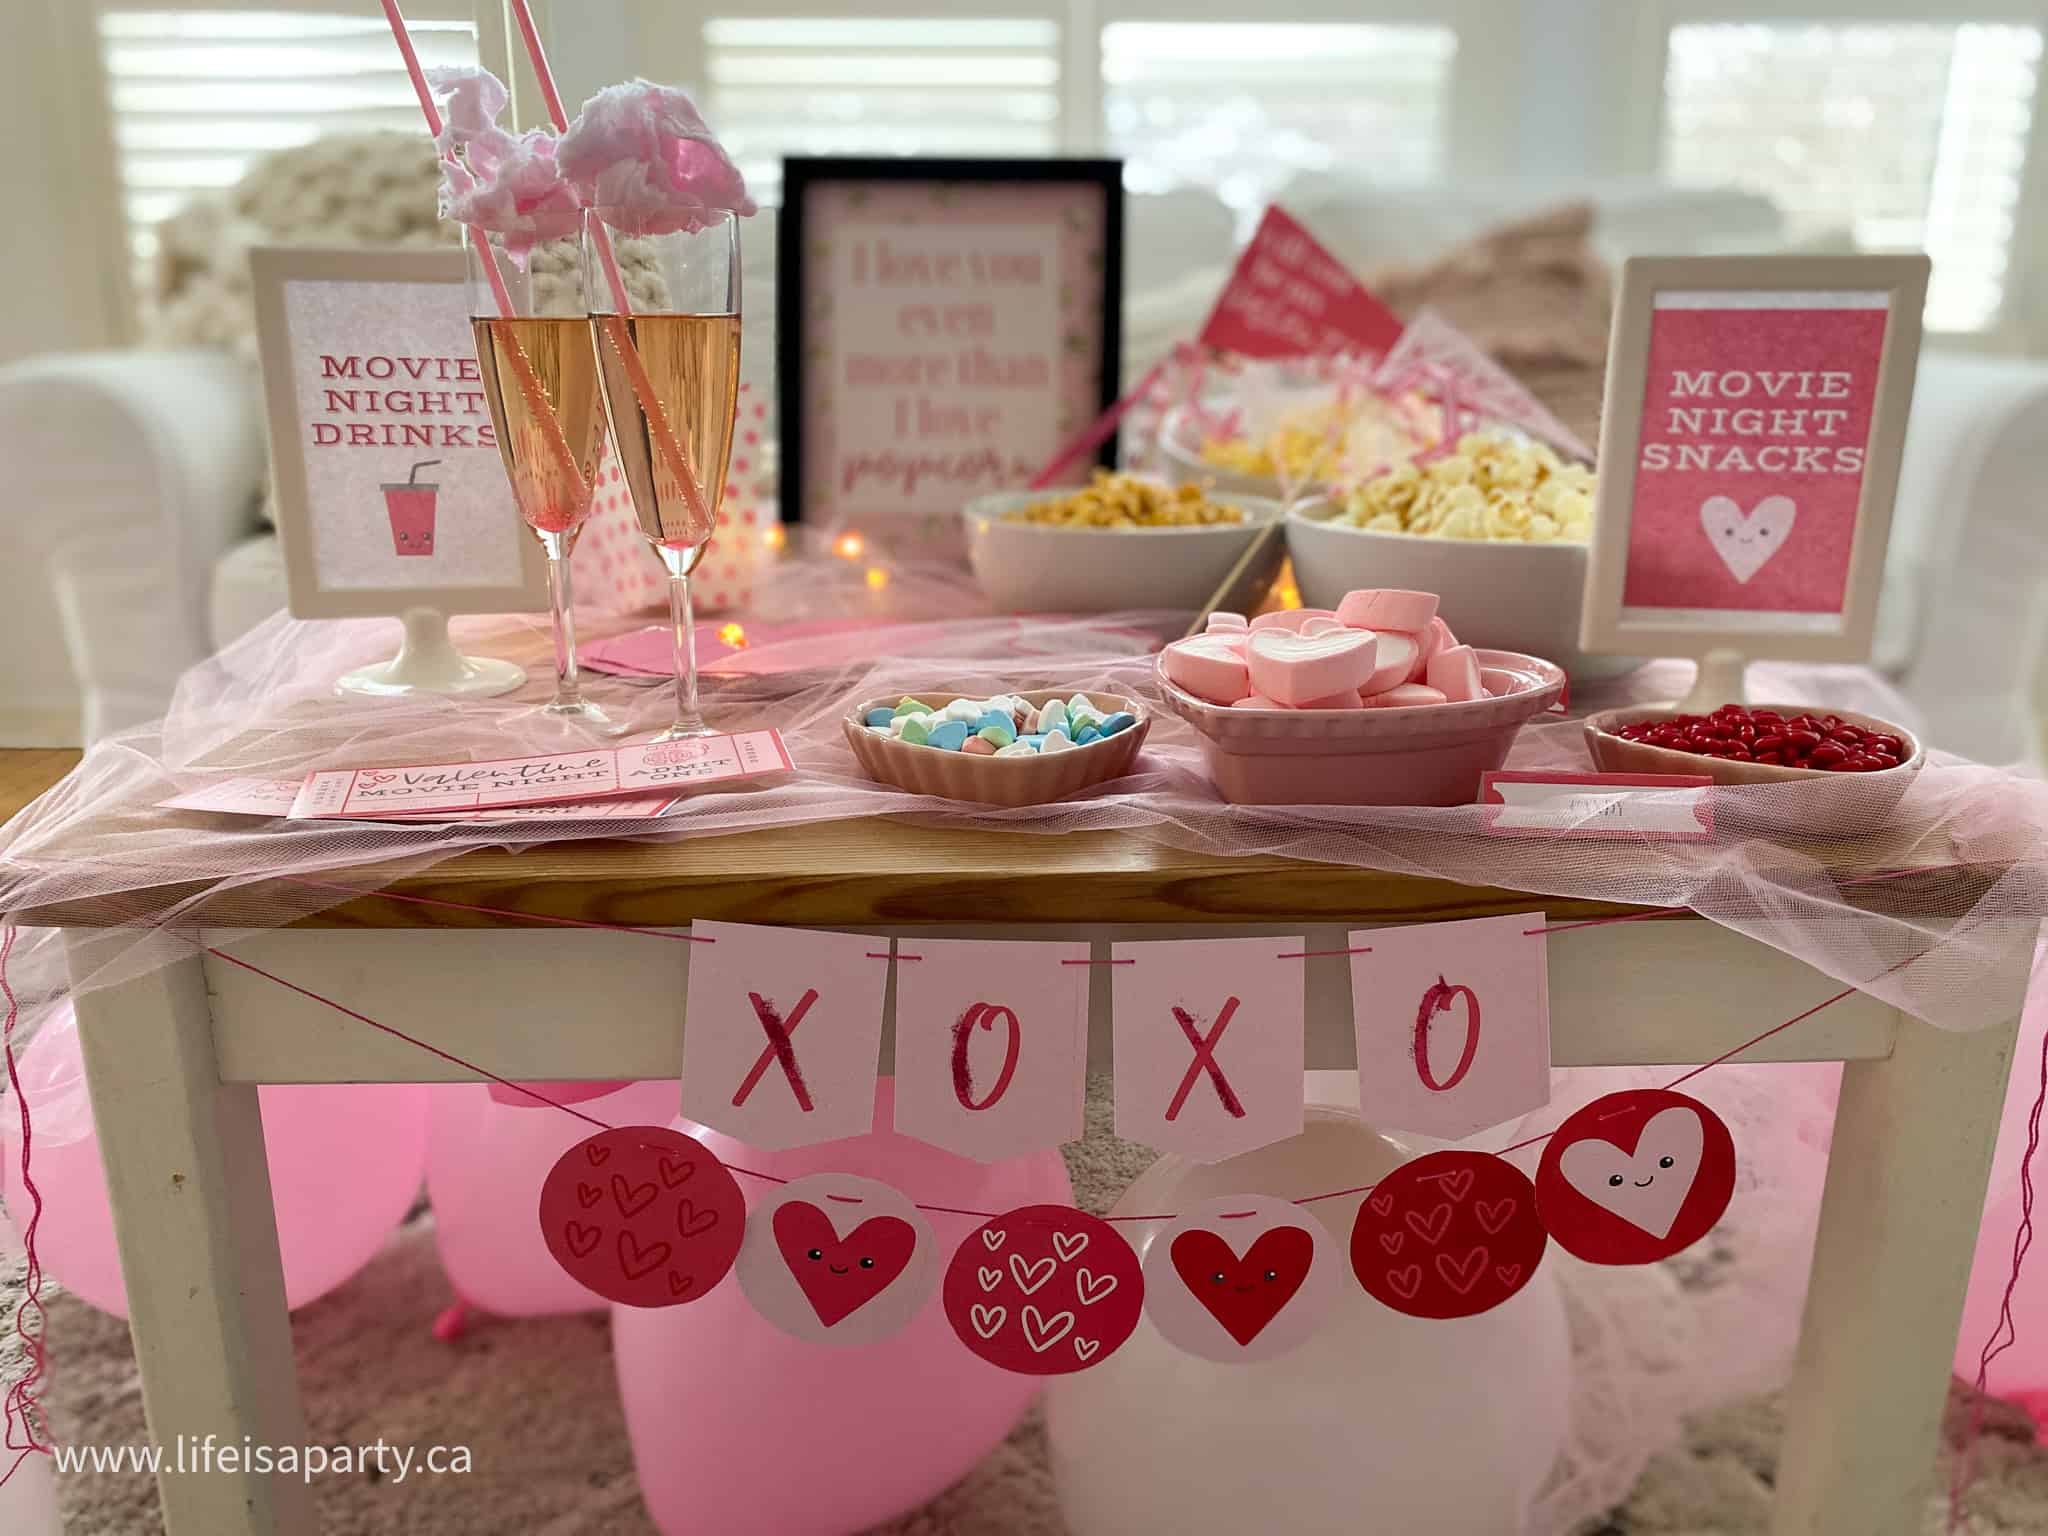 Valentine's Day party